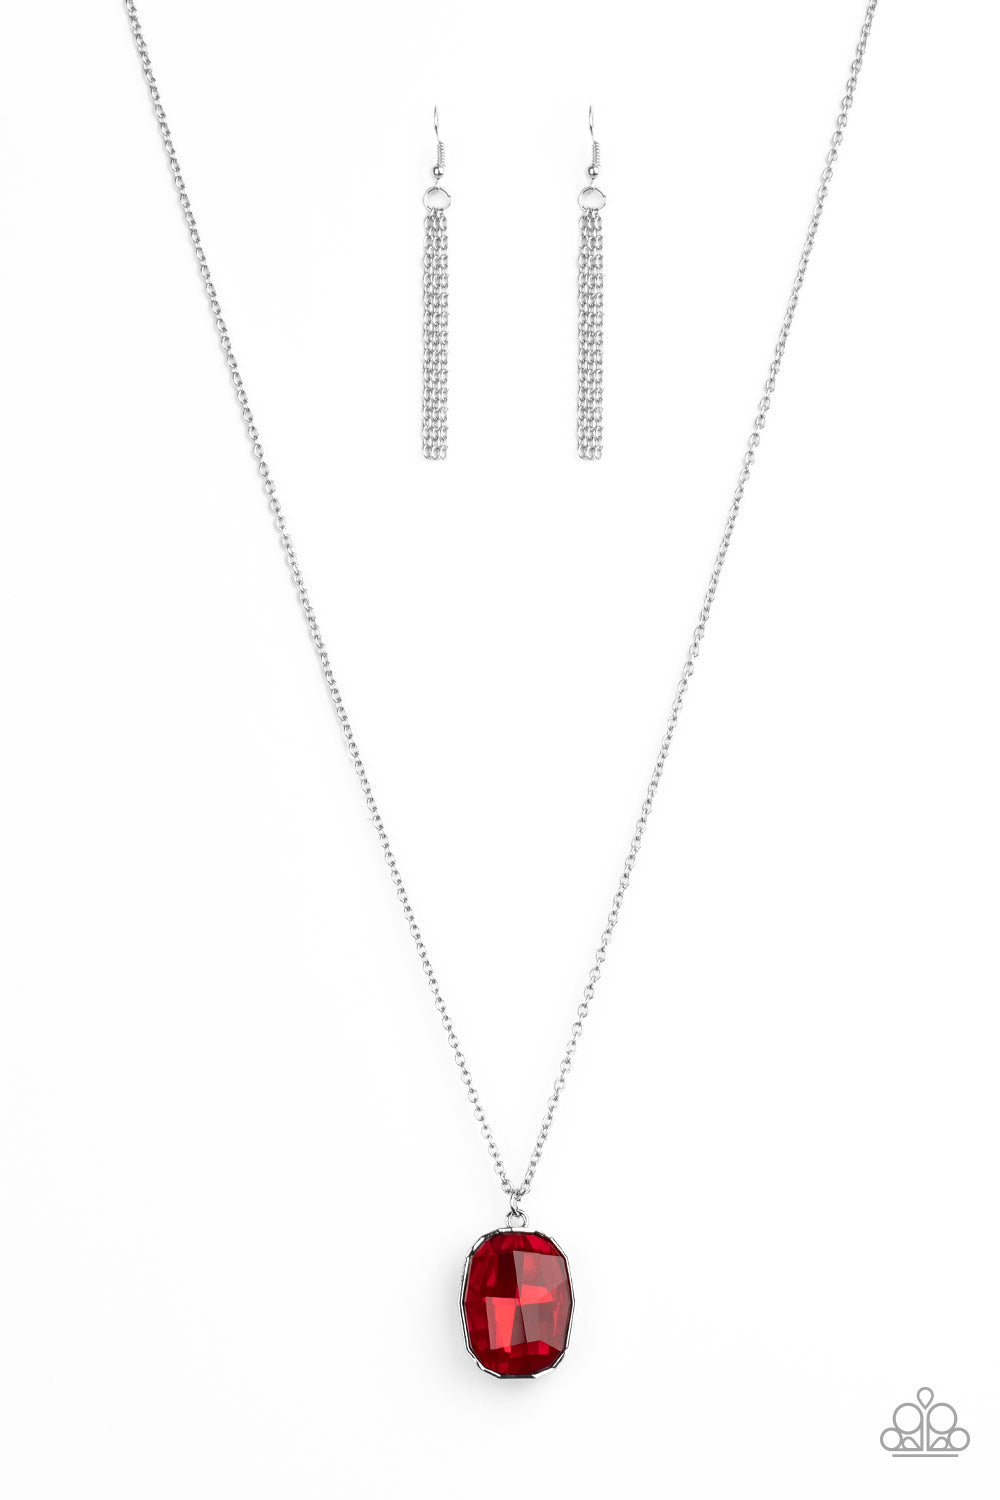 Paparazzi Accessories - Imperfect Iridescence - Red Necklace - Alies Bling Bar